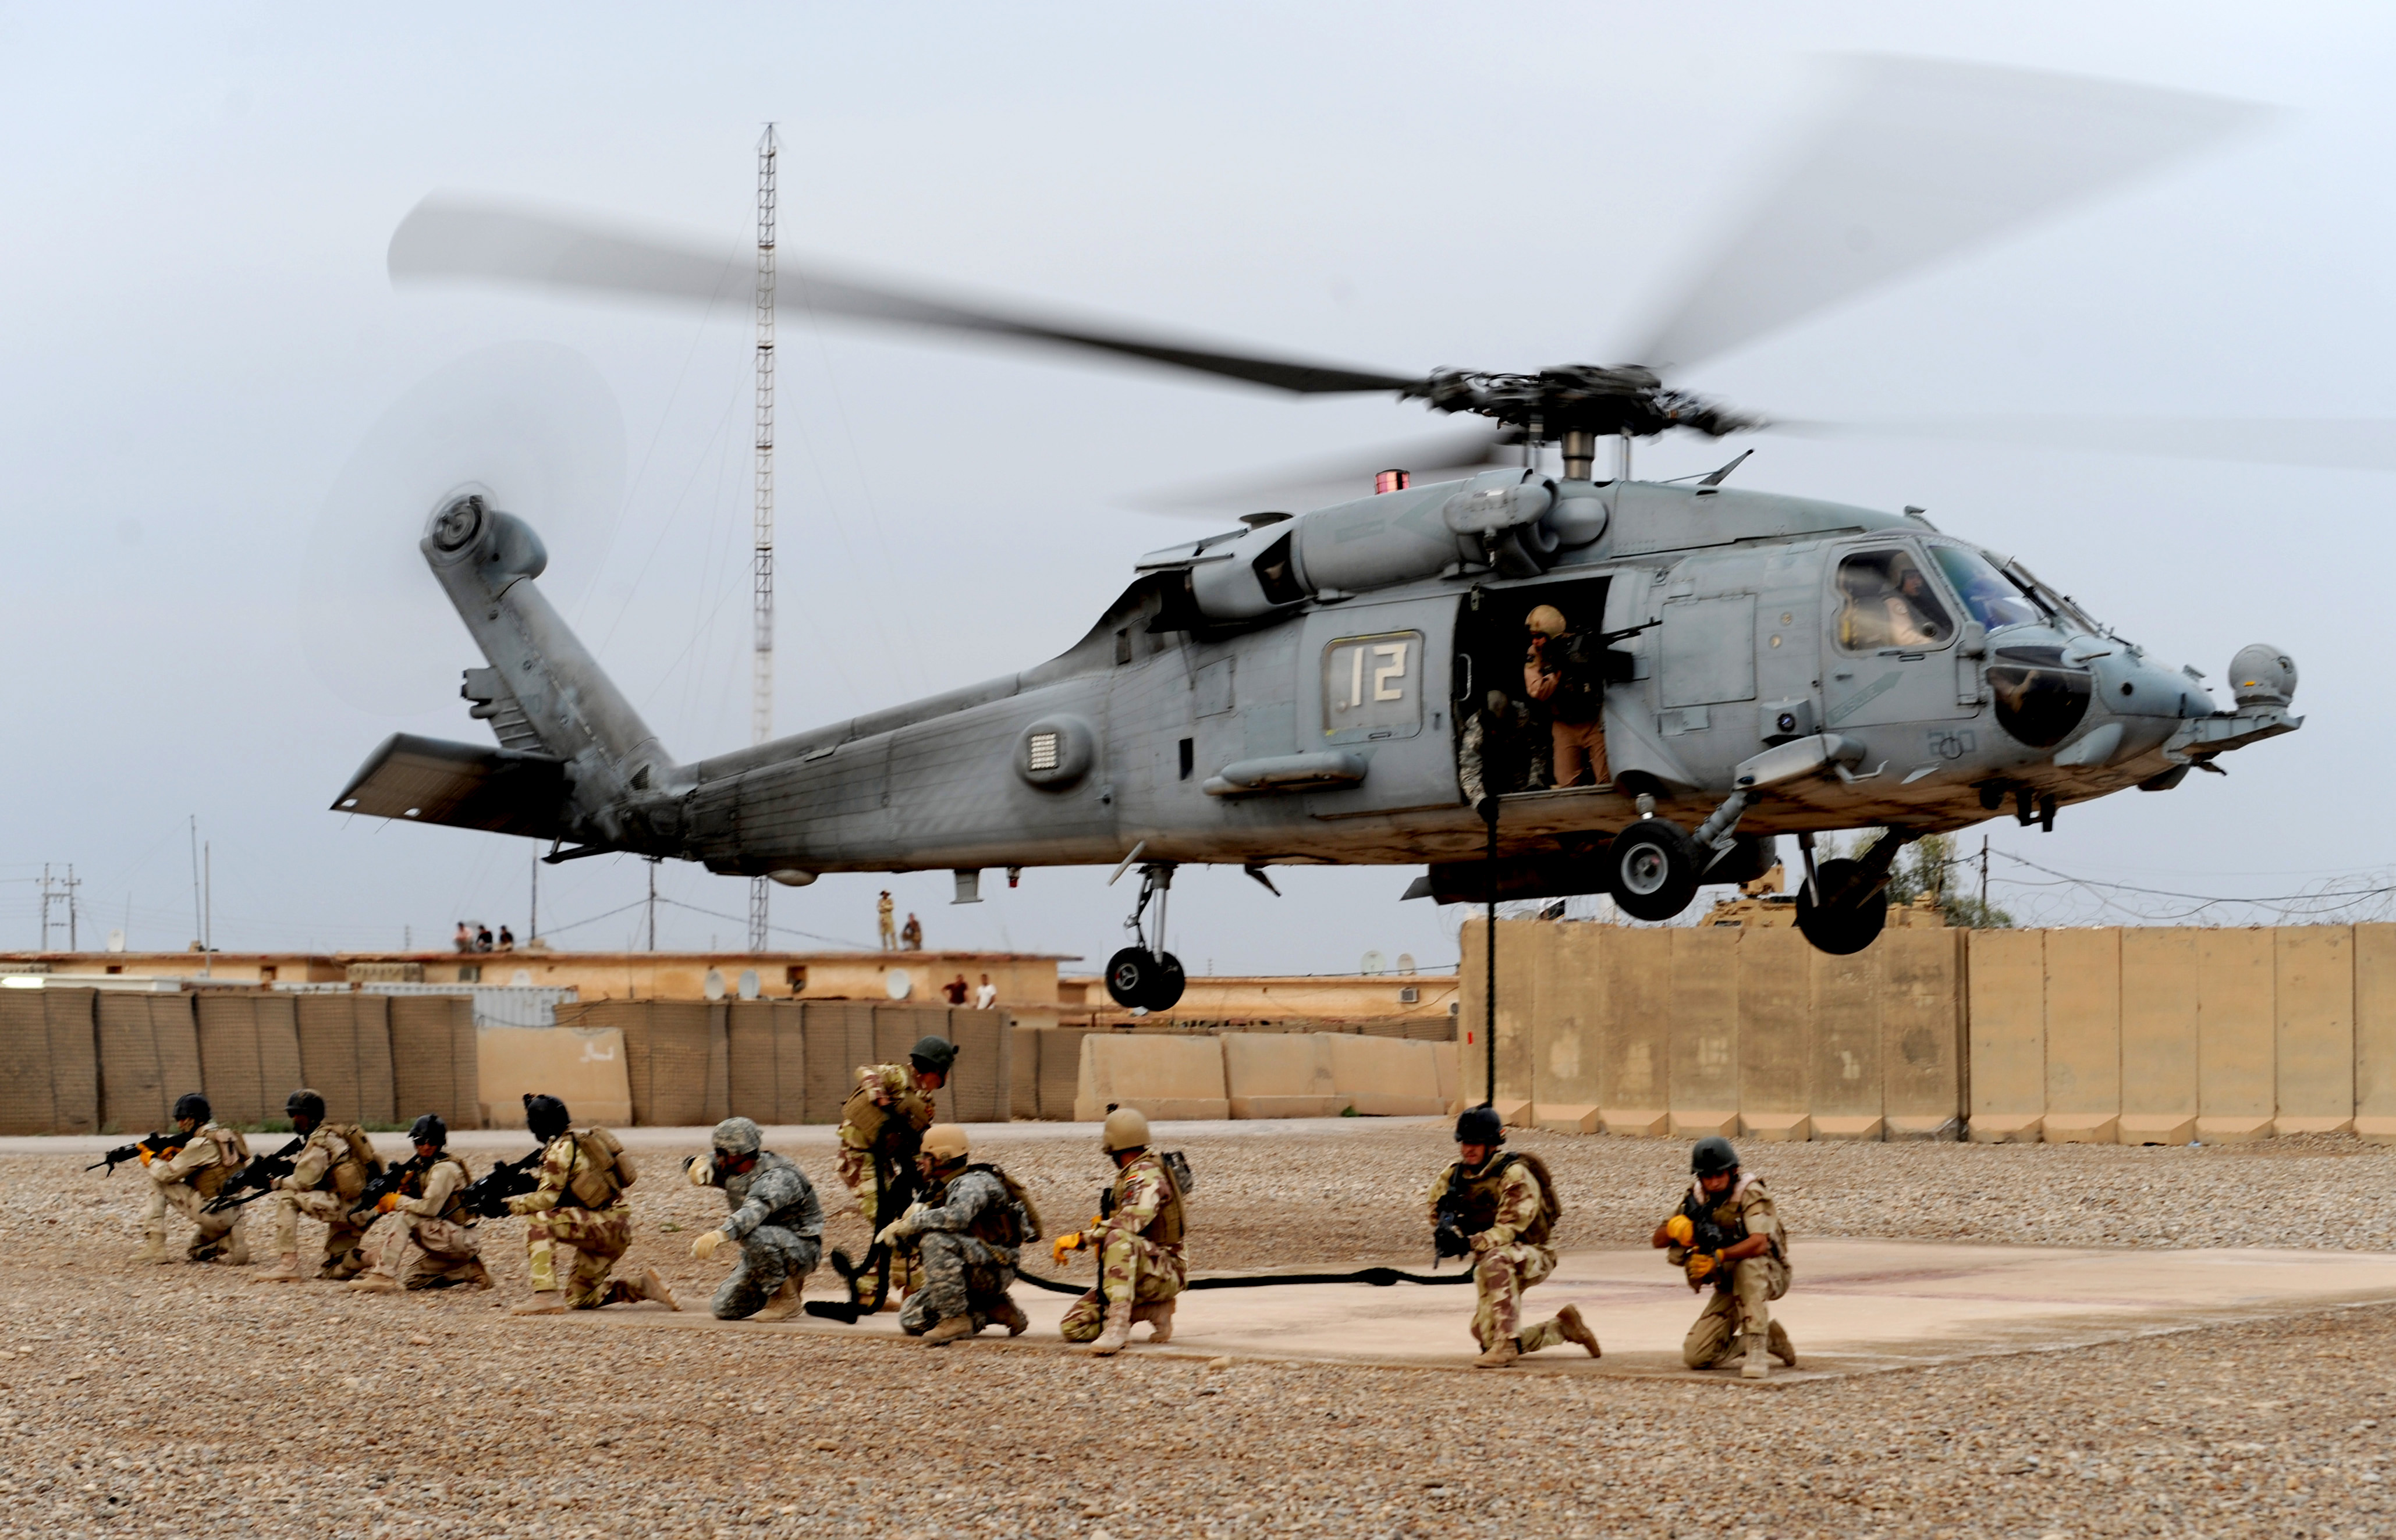 US_Navy_100427-N-0879R-998_Iraqi_Special_Operations_Forces_soldiers_set_a_perimeter_after_fast-roping_insertion_training.jpg